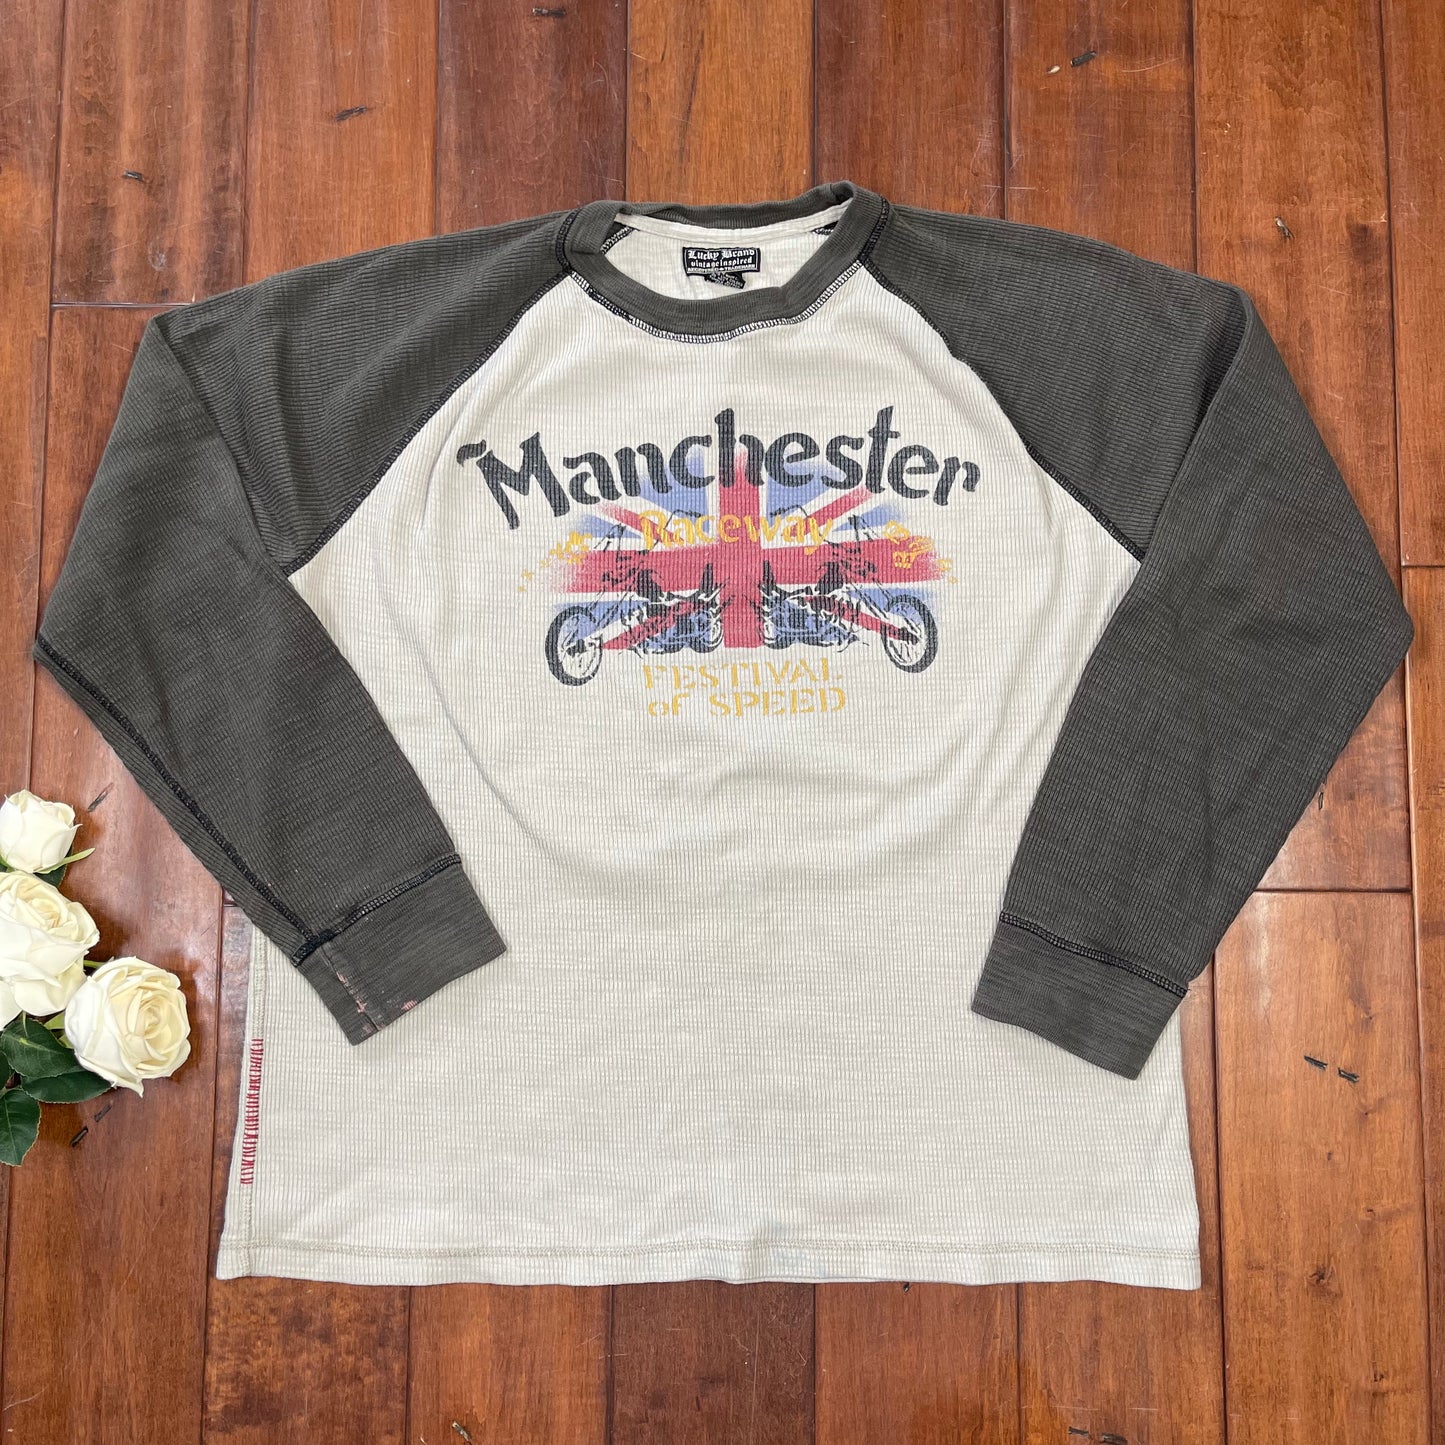 THRIFTED LUCKY BRAND “MANCHESTER” THERMAL LONG SLEEVE